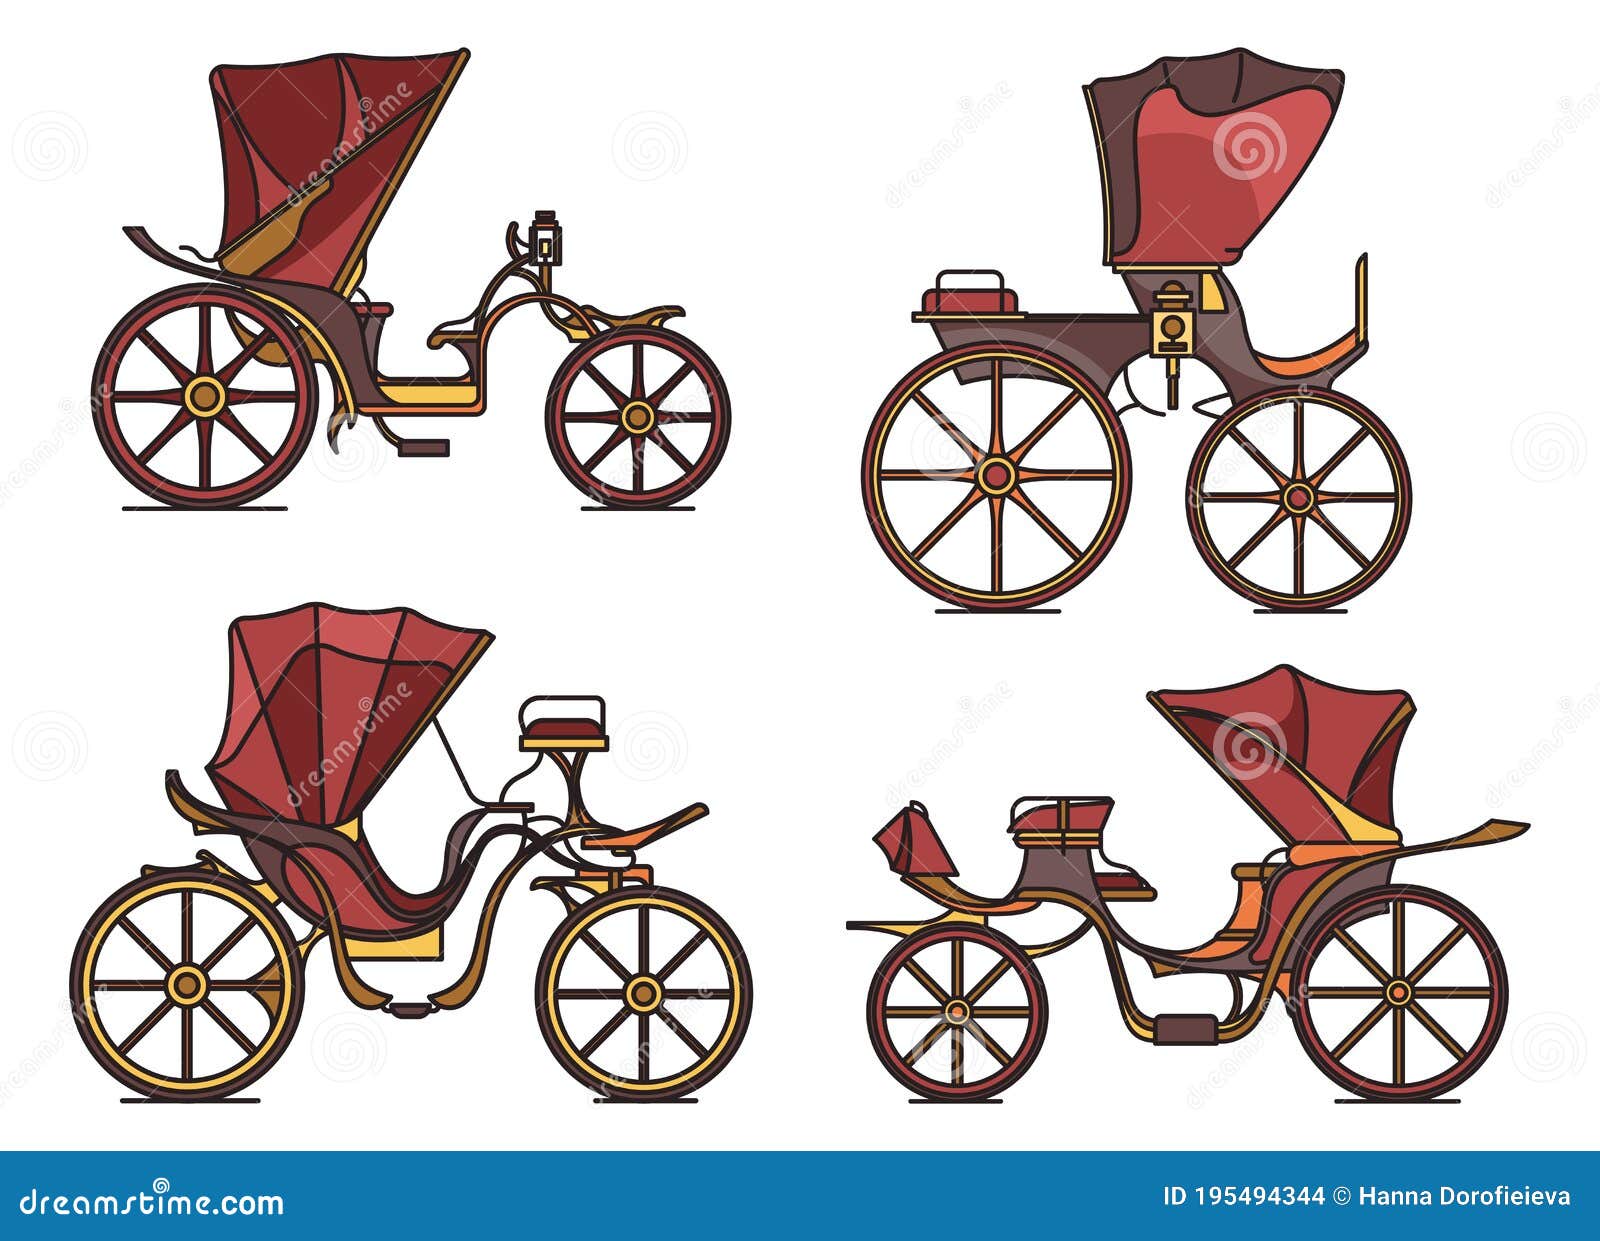 carriages of xix century. french chariot in line